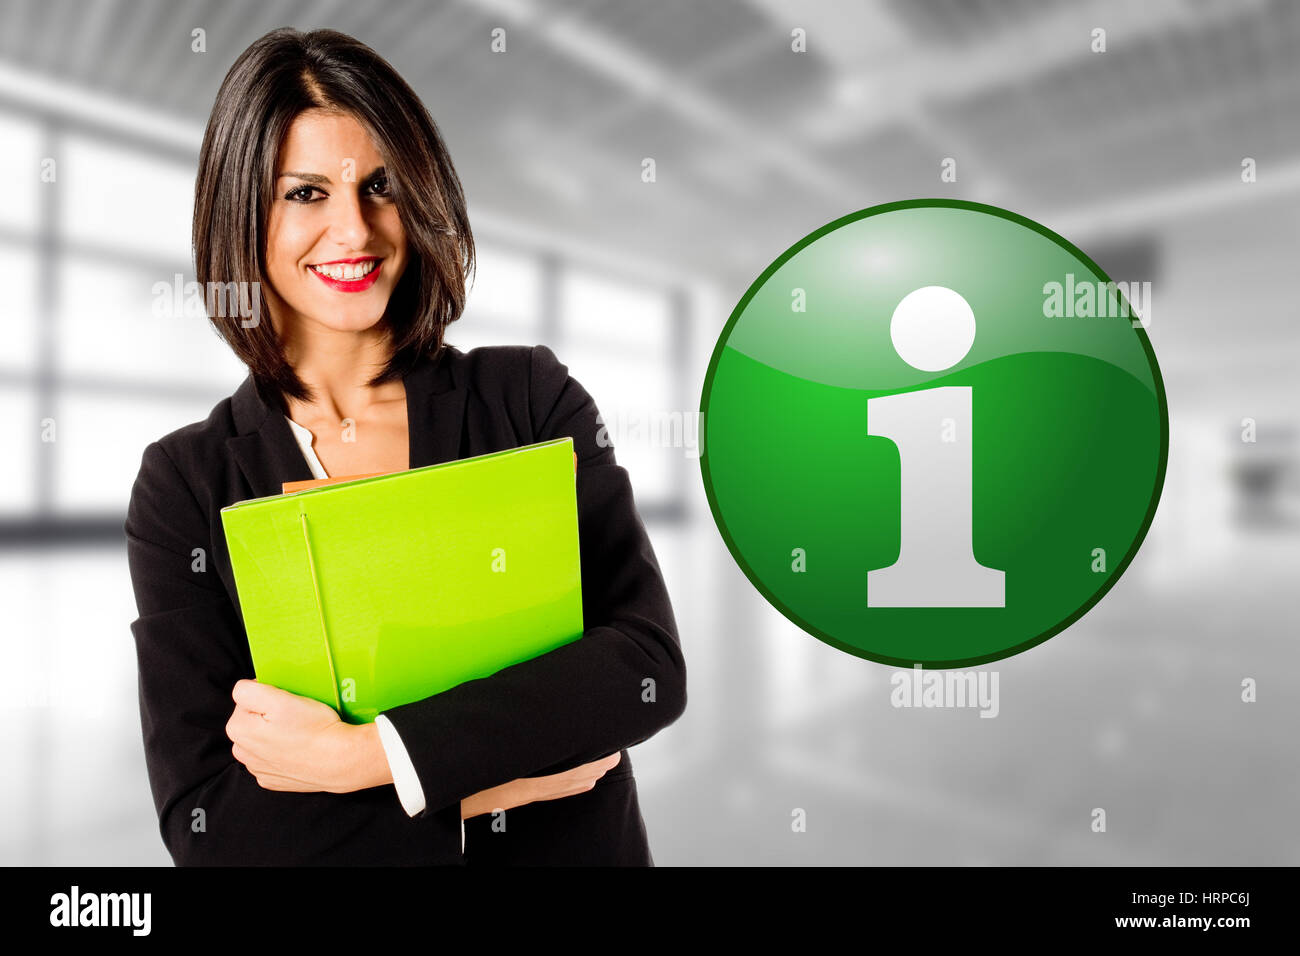 smiling business woman consumer information Stock Photo